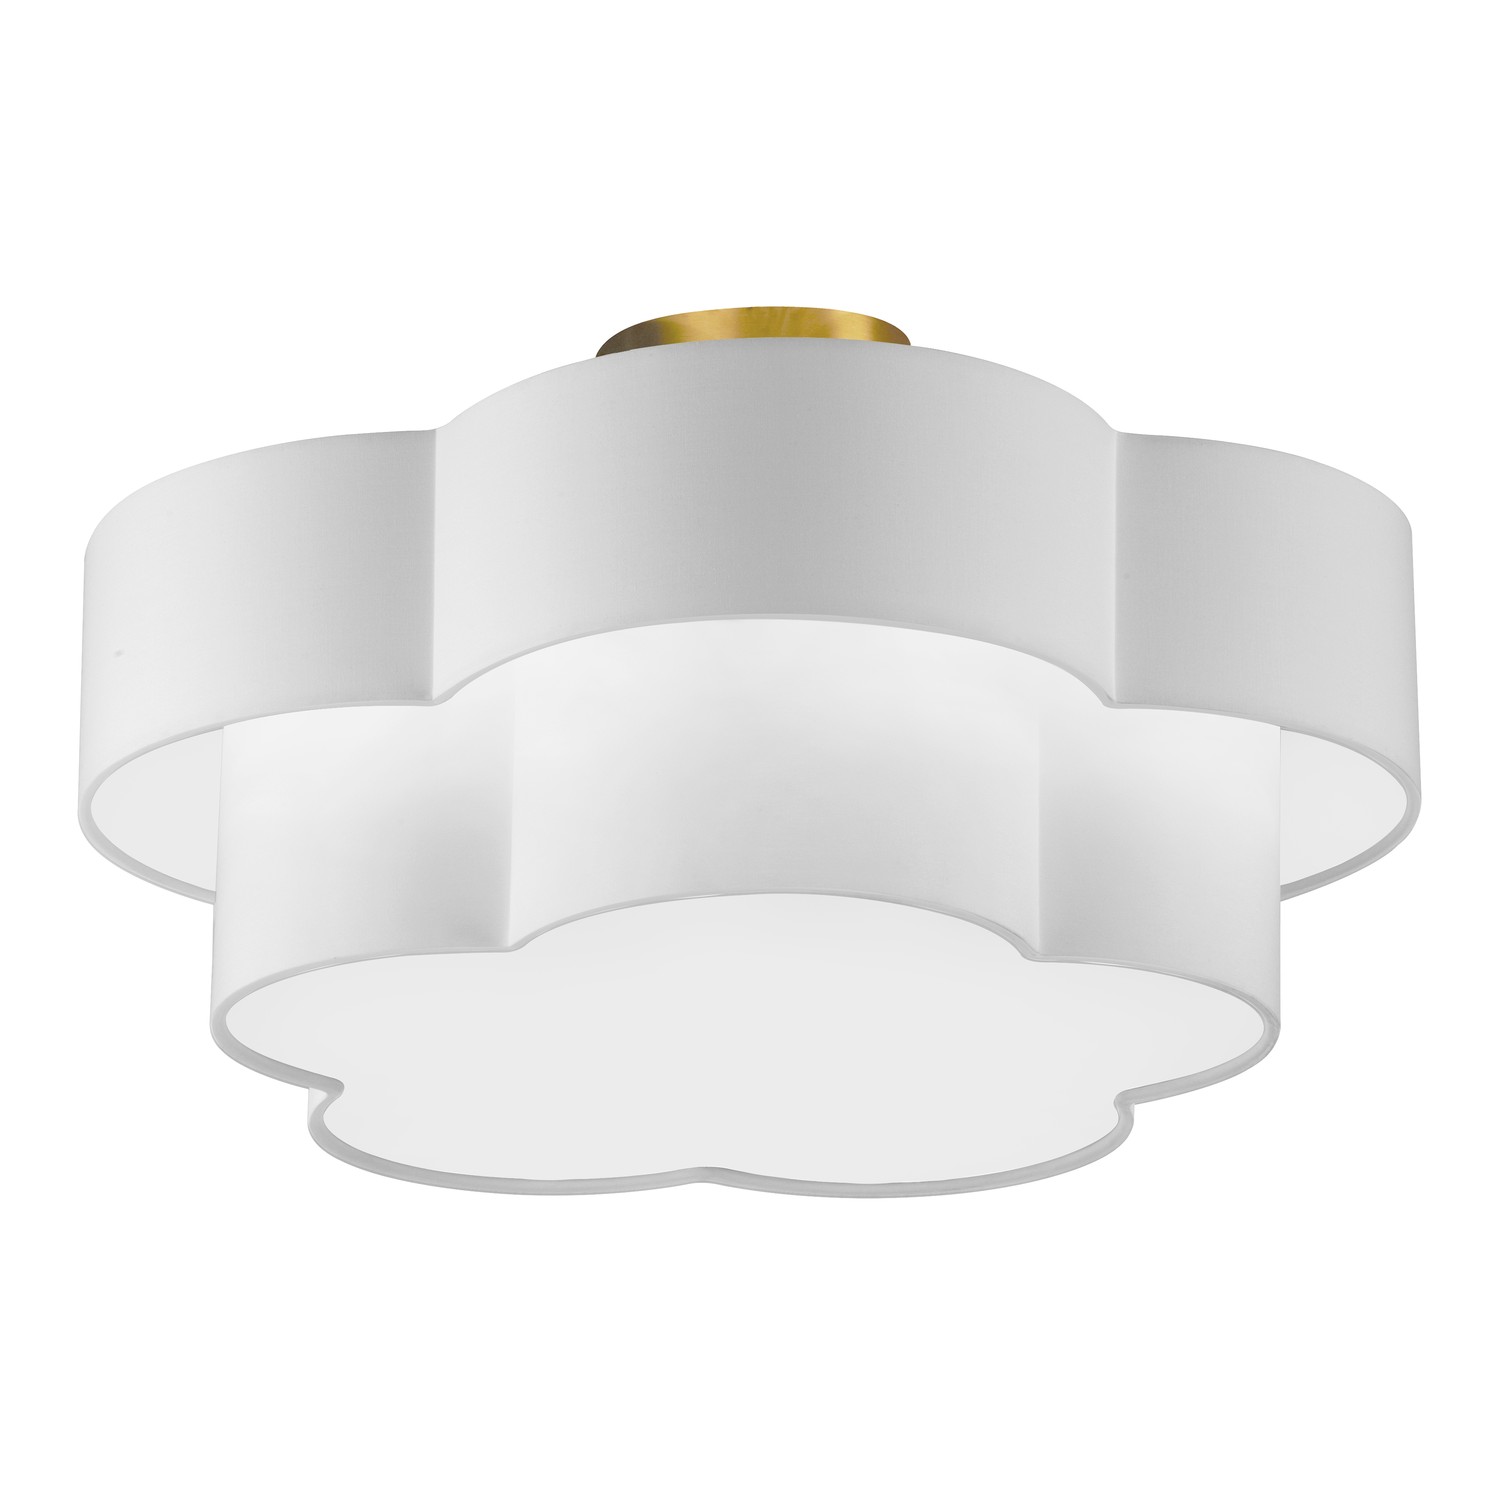 3 Light Incandescent Flush Mount, Aged Brass with White Shade